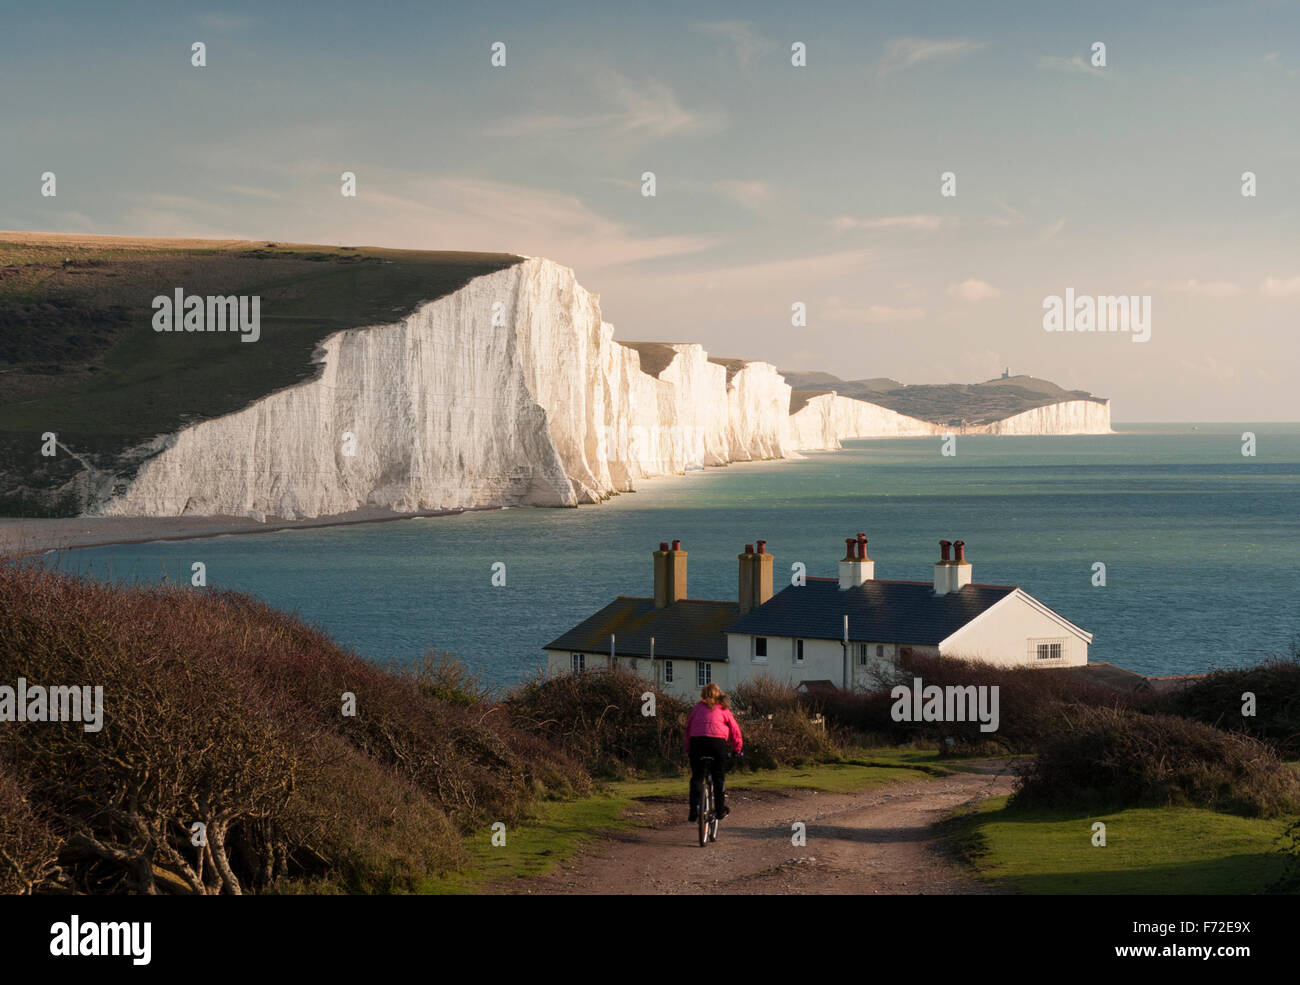 The famous Seven Sisters Cliffs, and Coast Guard Cottages and an unknown cyclist riding down the track, at Seaford Head,EastSussex, UK. Stock Photo